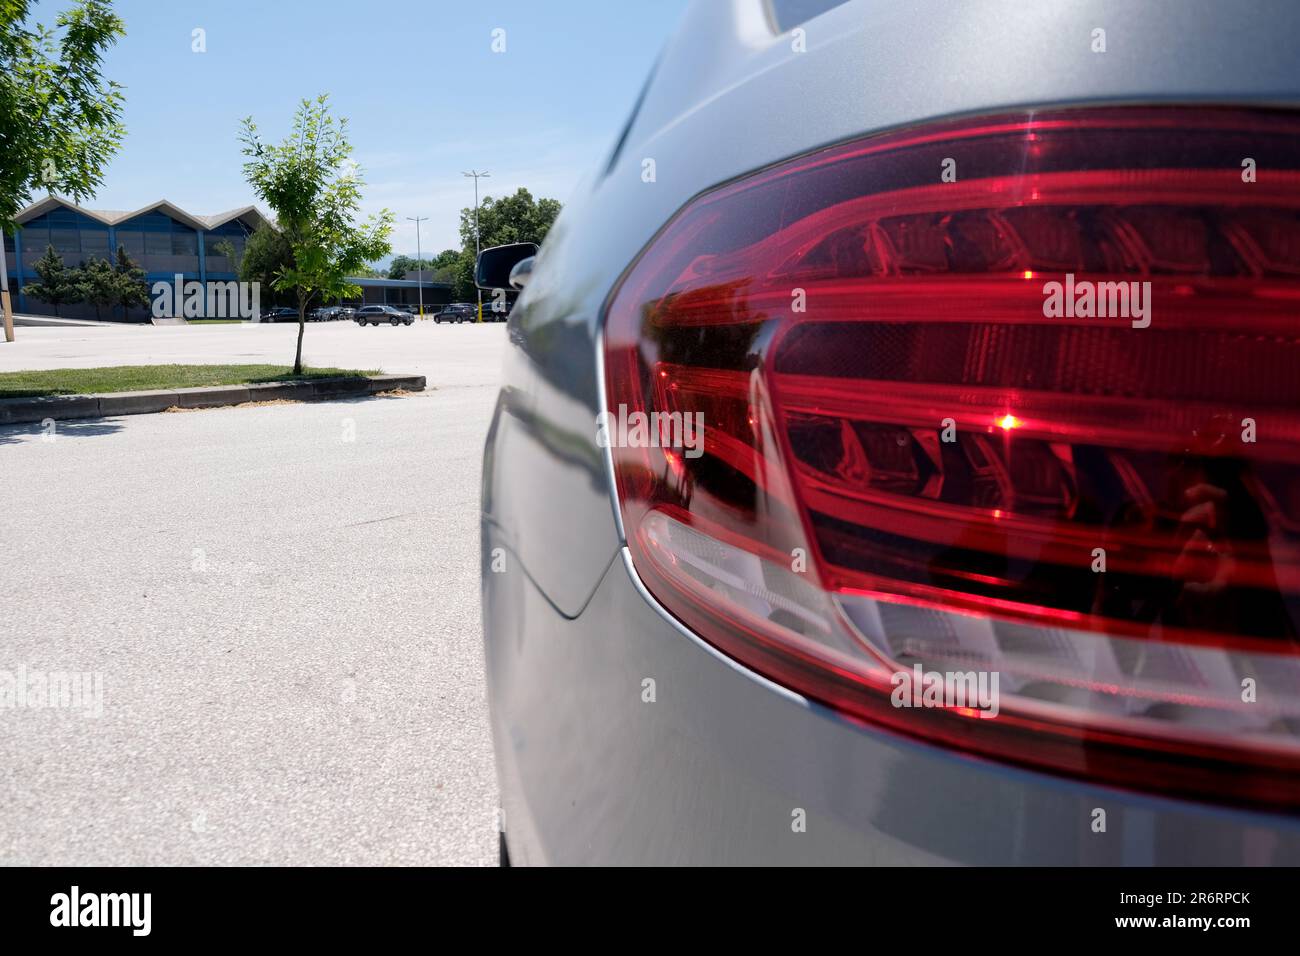 A sideline of Mercedes is class Stock Photo